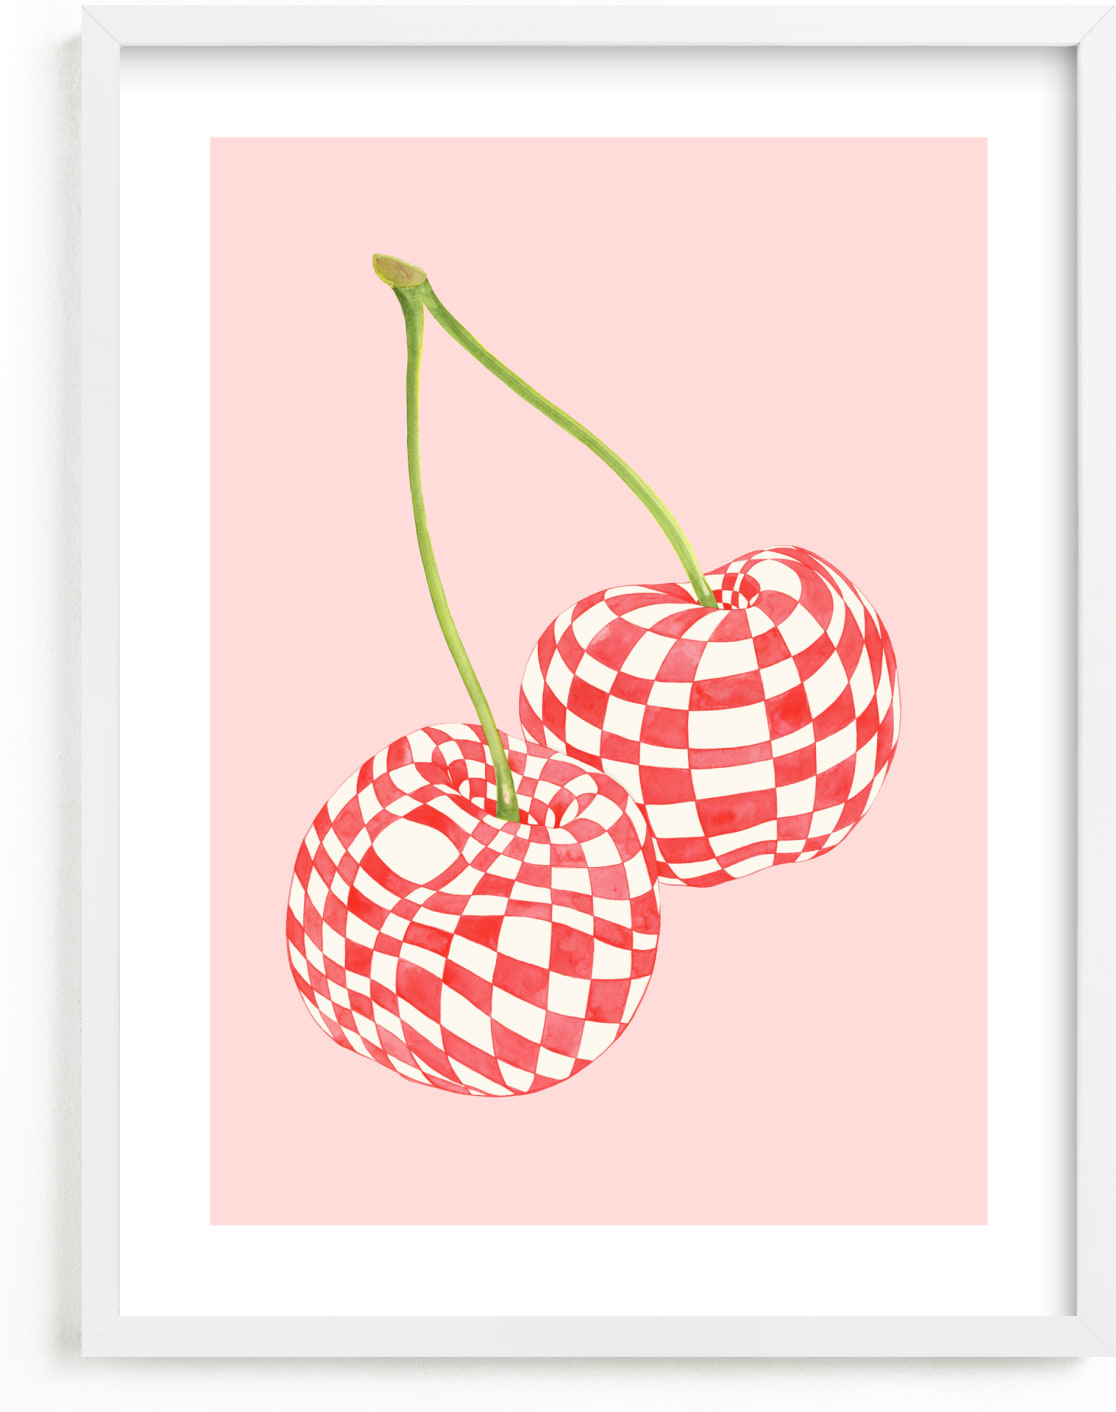 This is a white kids wall art by Luci Power called Checkerboard Cherries.